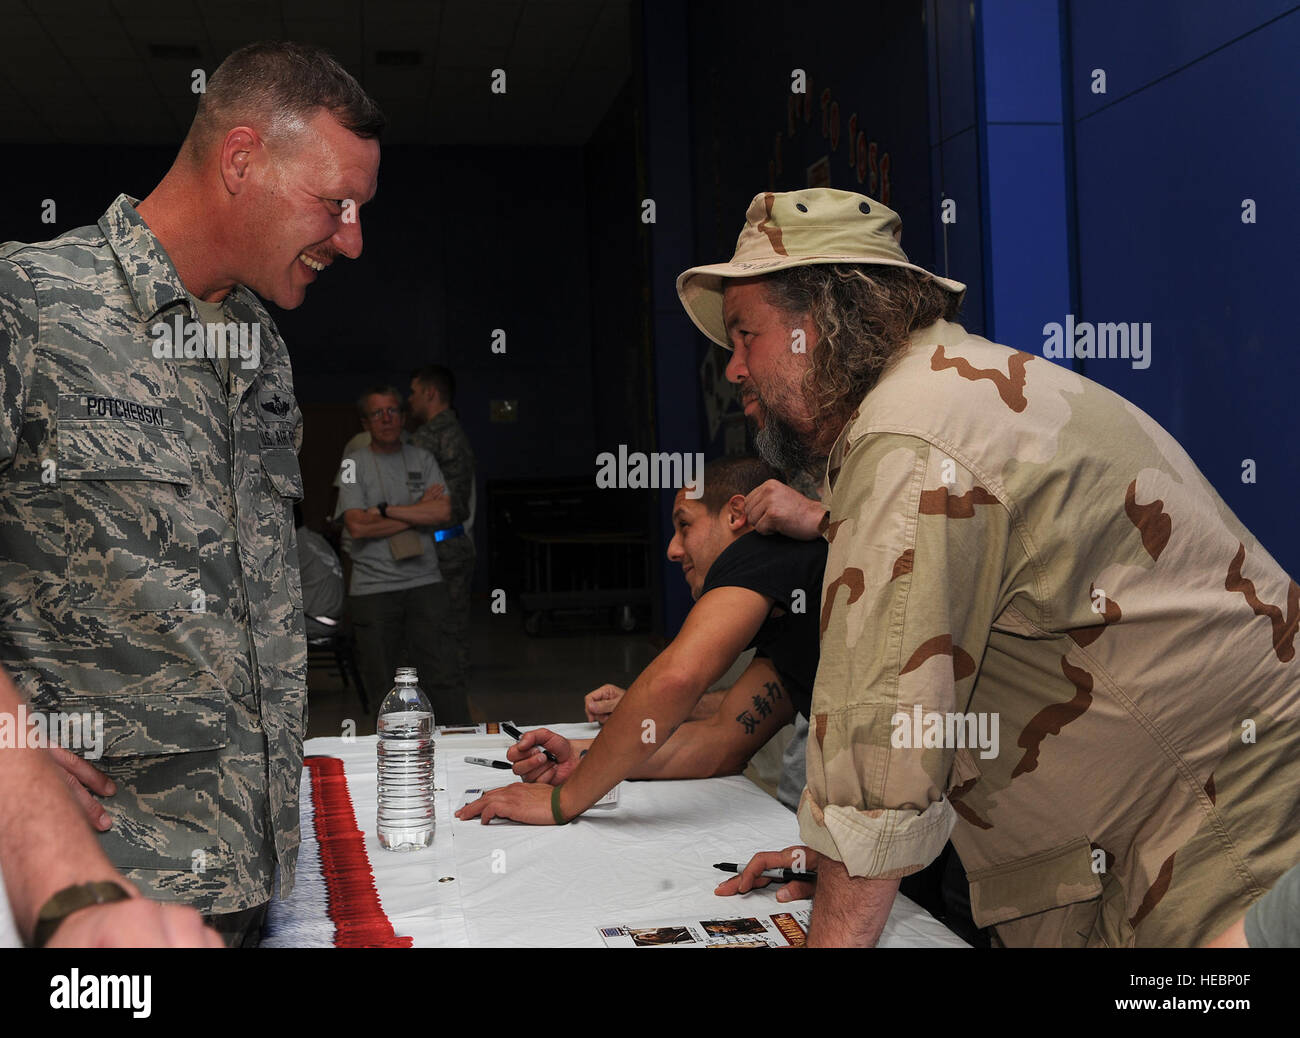 Senior Master Sgt. Ron Potchebski, 362nd Expeditionary Reconnaissance Squadron superintendent, talks with Mark Boone Junior, a cast member of Sons of Anarchy at a meet and greet event at Joint Base Balad, Iraq, March 15, 2010. Four cast members from the hit television show are touring bases throughout Southwest Asia to show their appreciation and provide a morale boost for deployed personnel. (U.S. Air Force photo by Master Sgt. Linda C. Miller/Released) Stock Photo